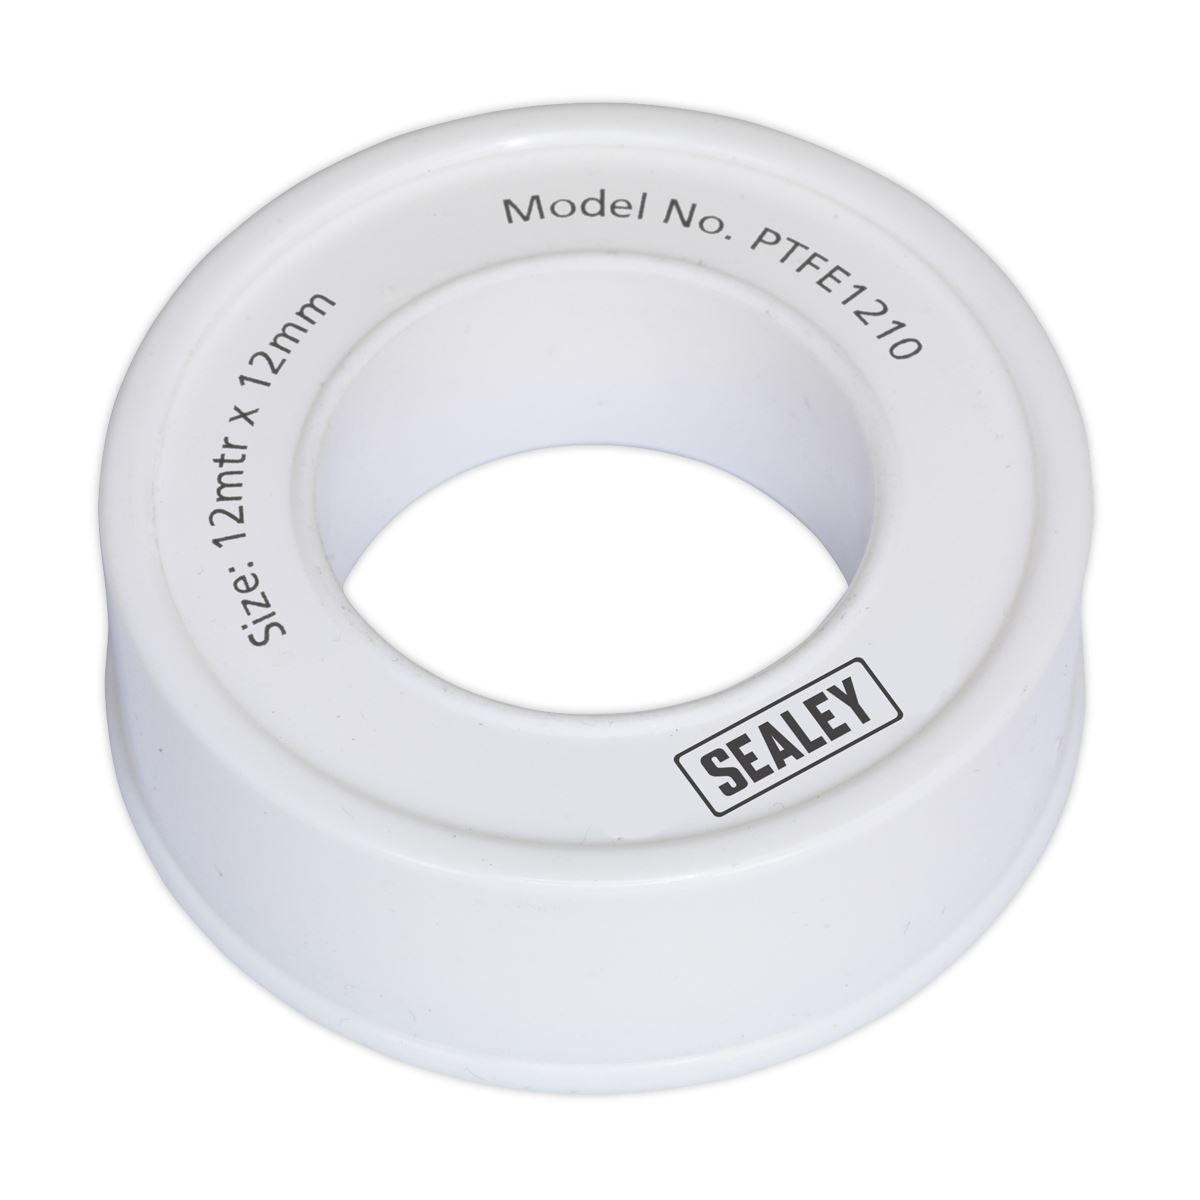 Sealey PTFE Thread Sealing Tape 12mm x 12m Pack of 10